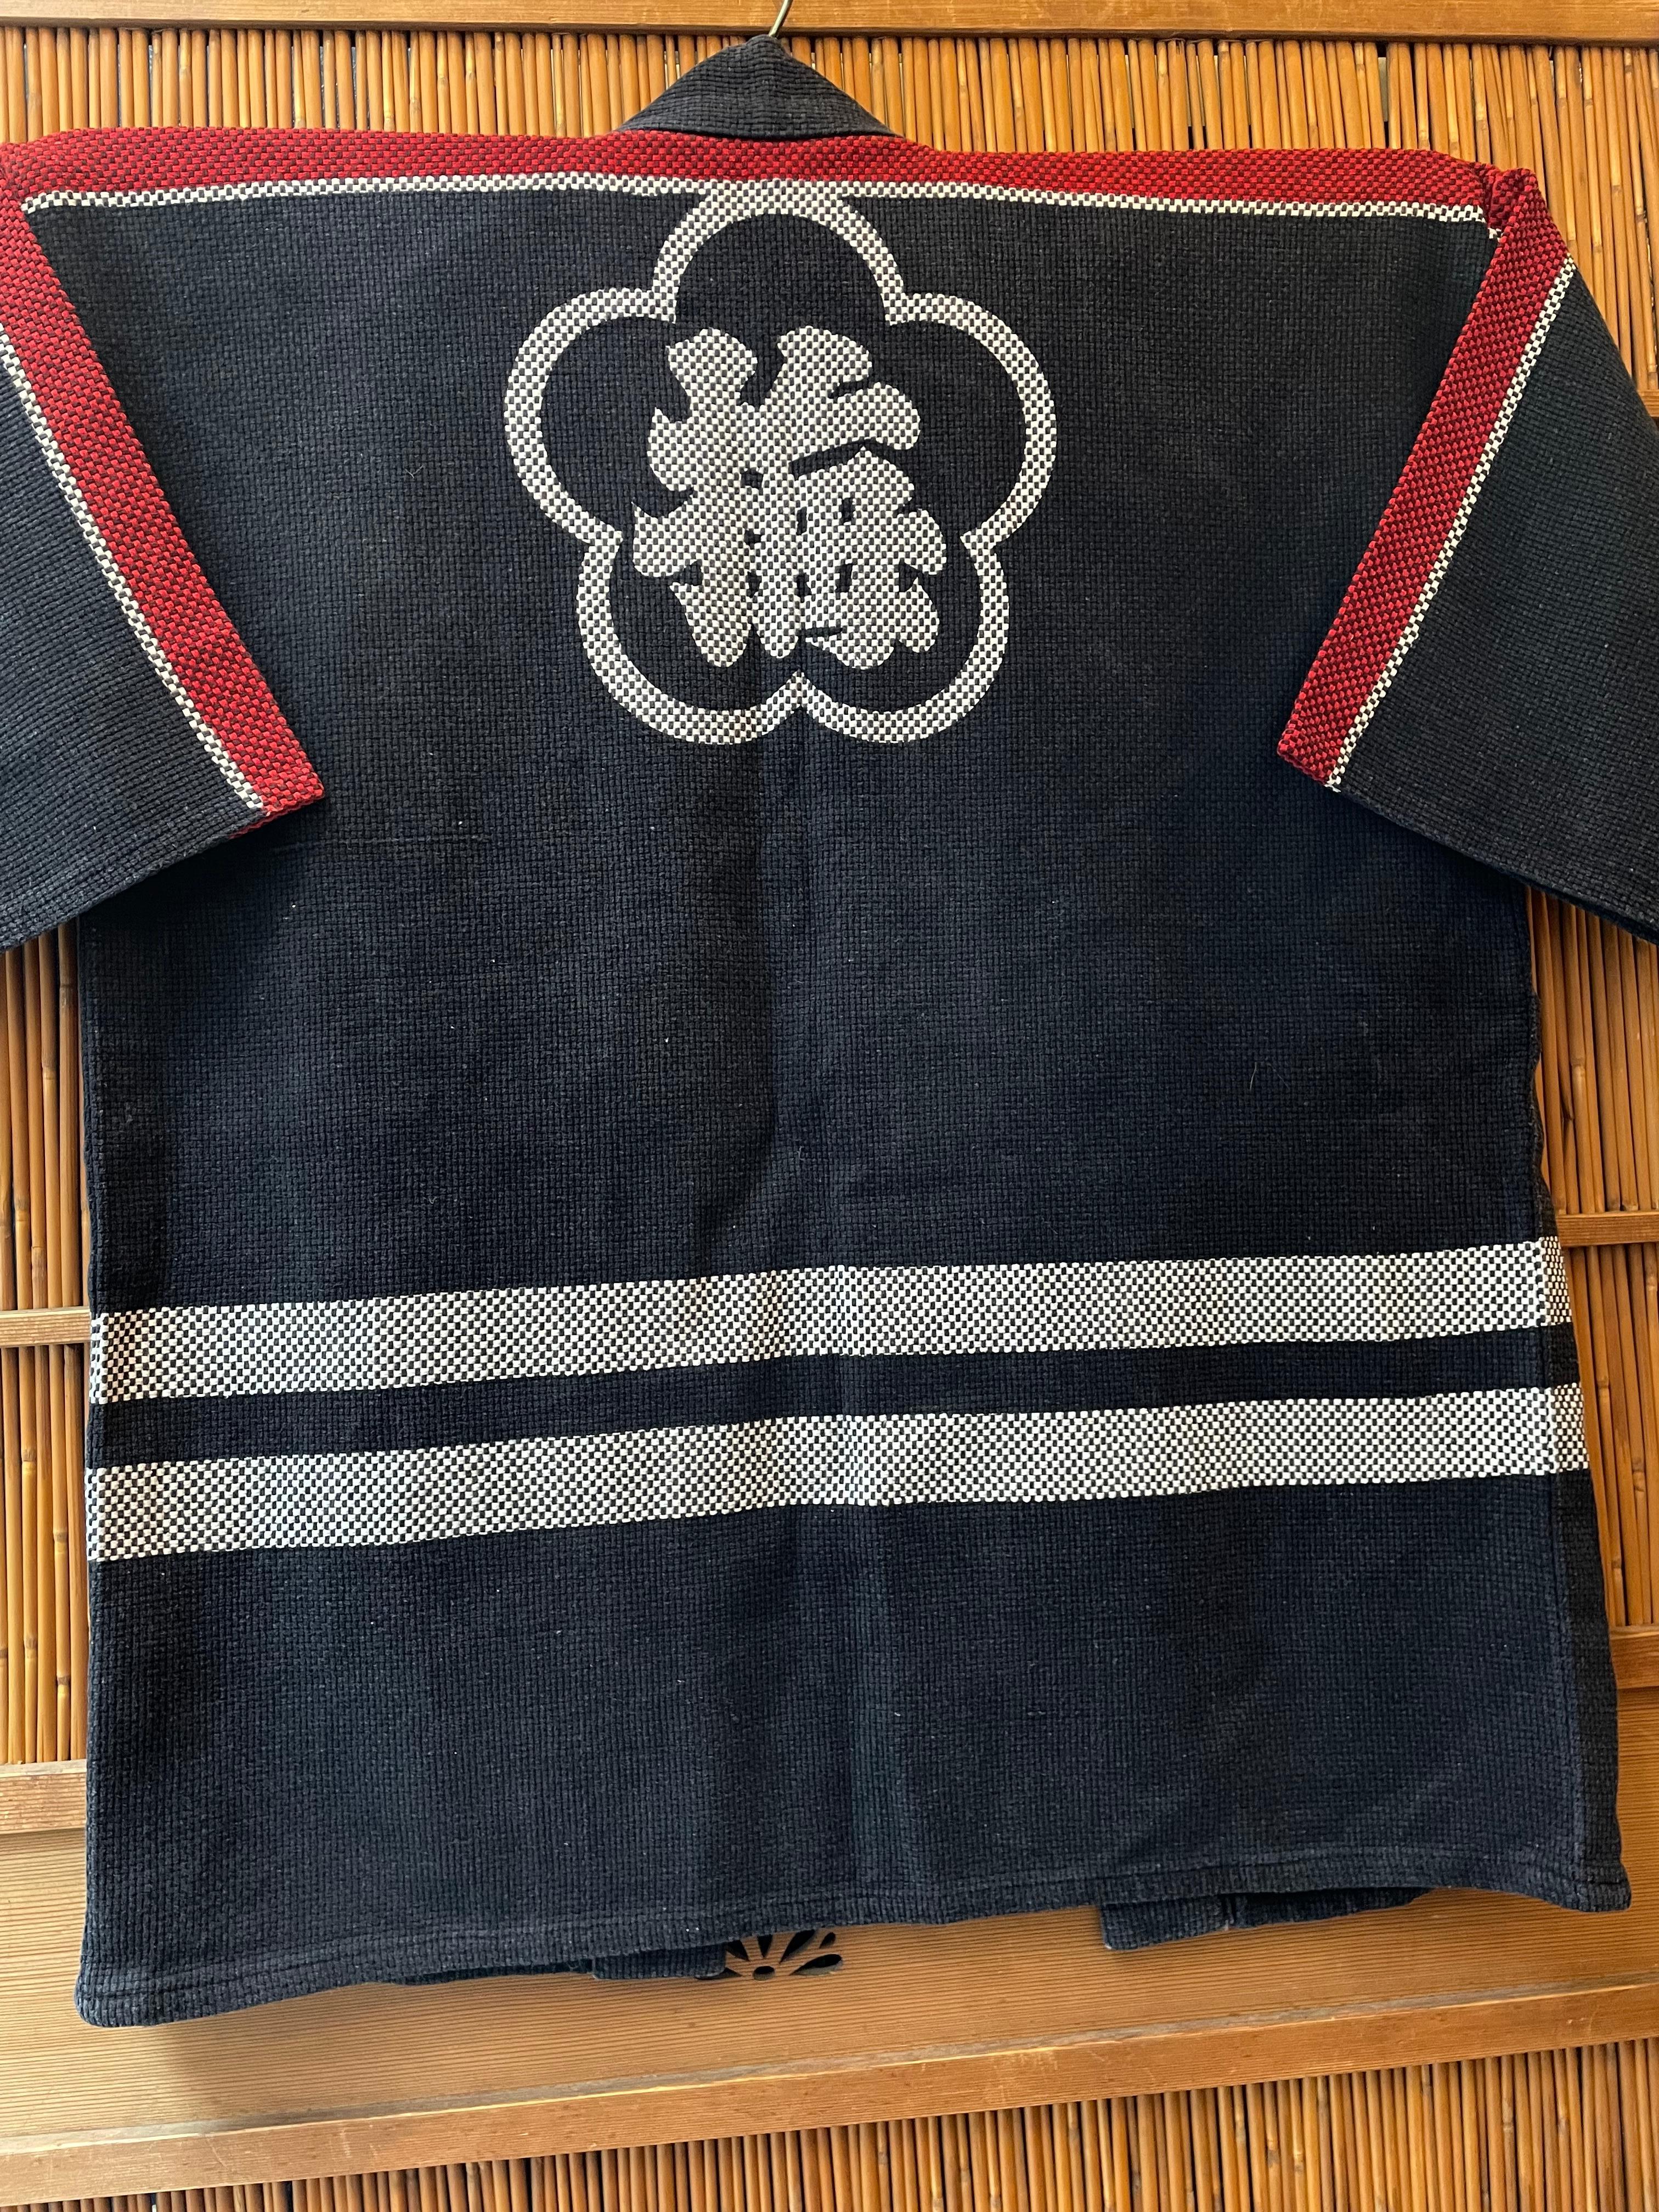 This Sashiko b(h)anten was made around 1920-1926 in Taisho era in Japan. 
On the front, it is written 'Member of Vigilance Committee Umezonocho ' in Japanese. On the back, it is written 'Ume'.

Sashiko banten is a hanten for firefighters, which